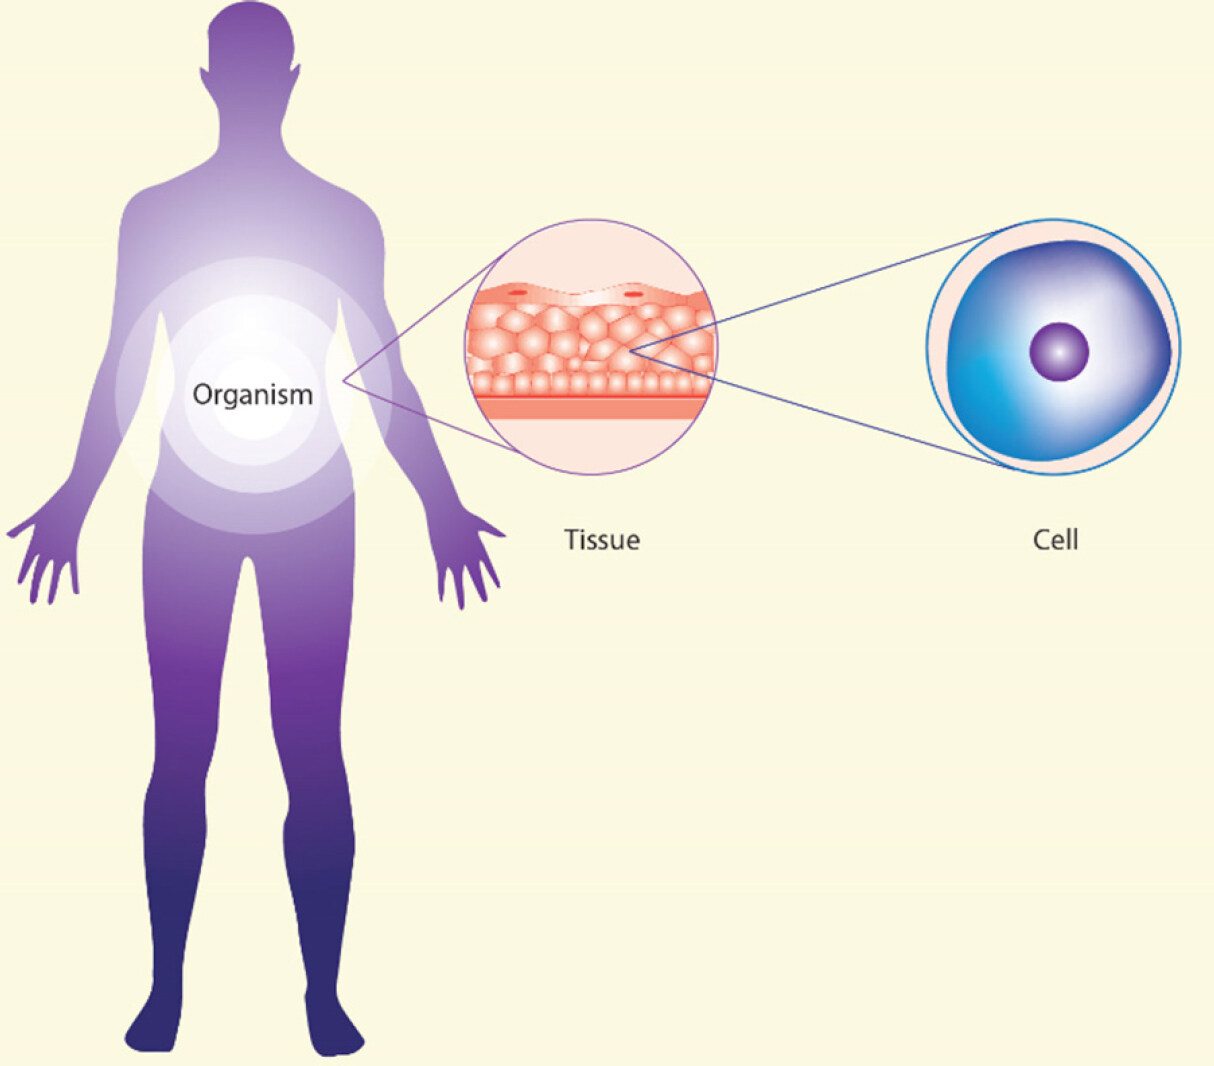 The systemic hallmarks of cancer